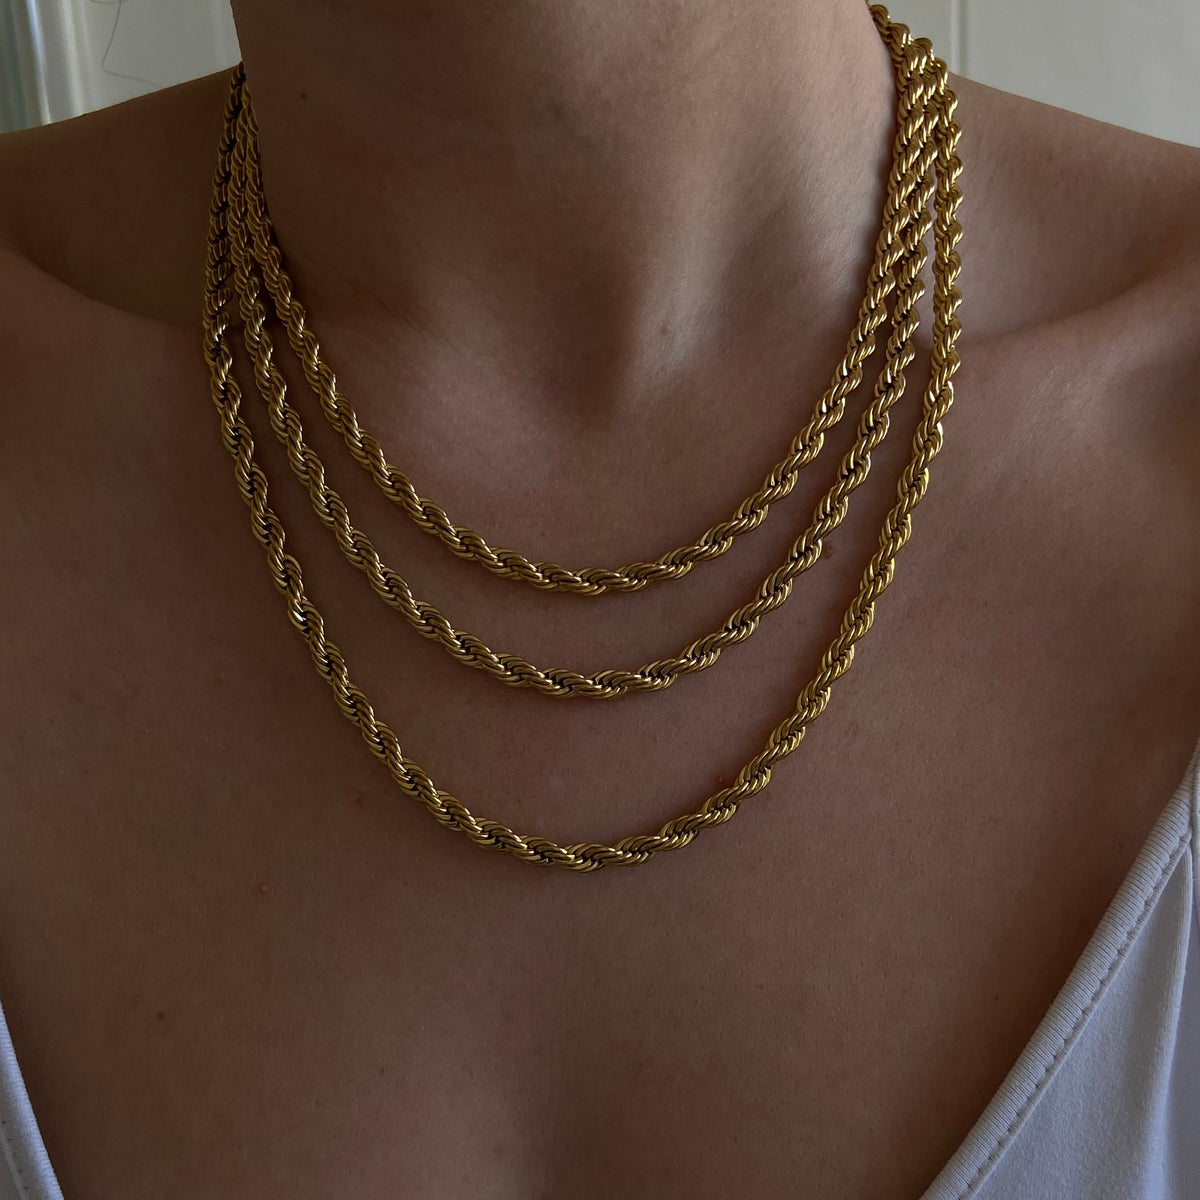 Rope Chain 5mm - Neckontheline